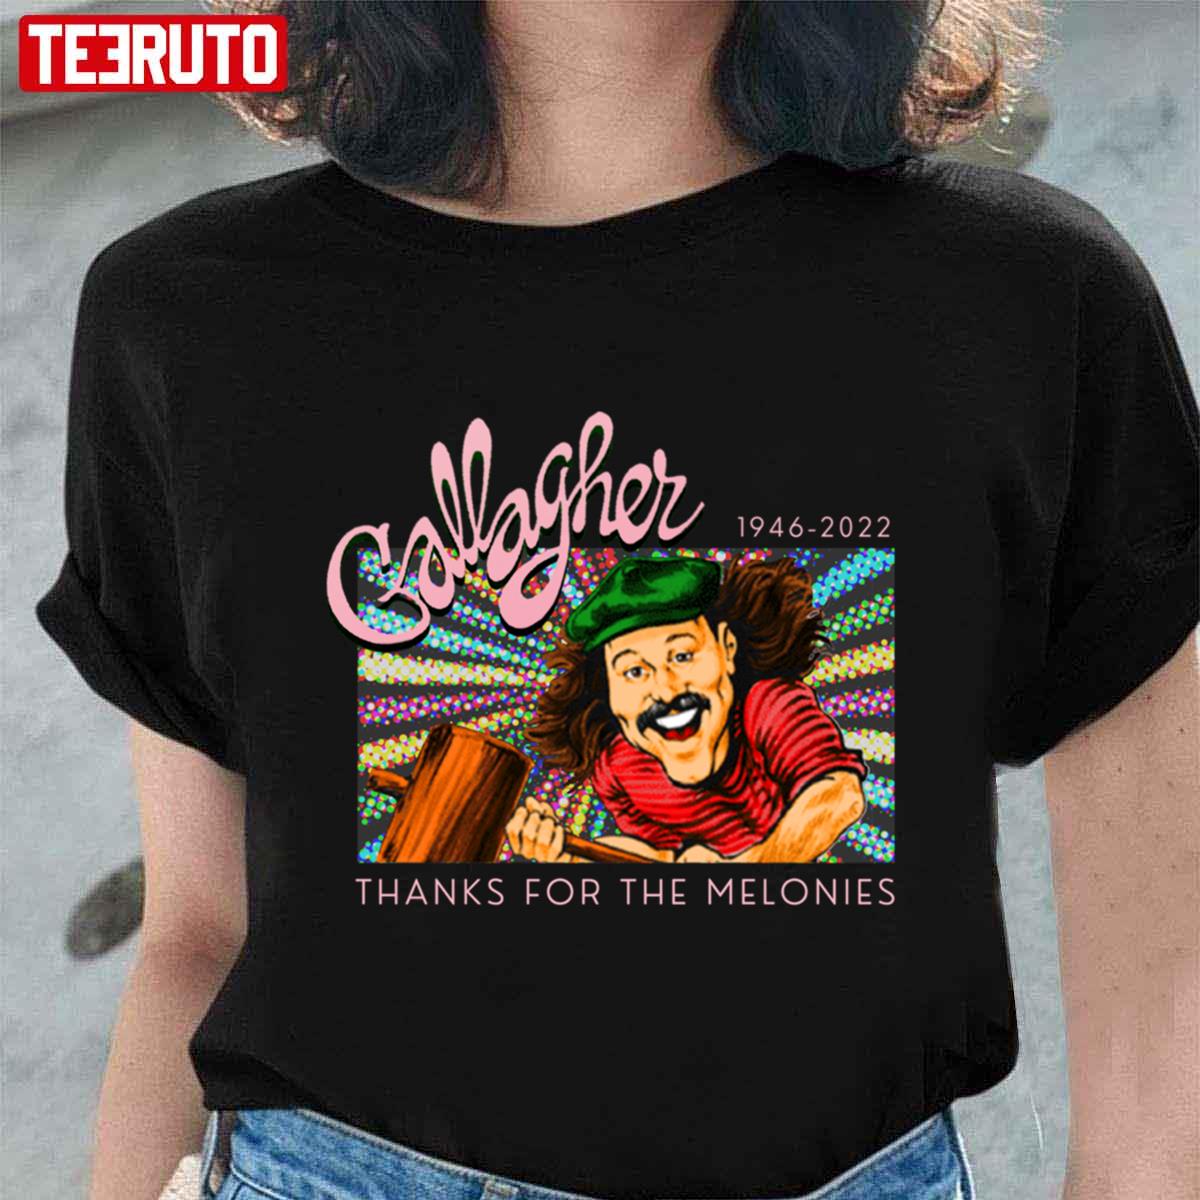 1946 2022 Gallagher Thanks For The Melonies Tribute Unisex T Shirt